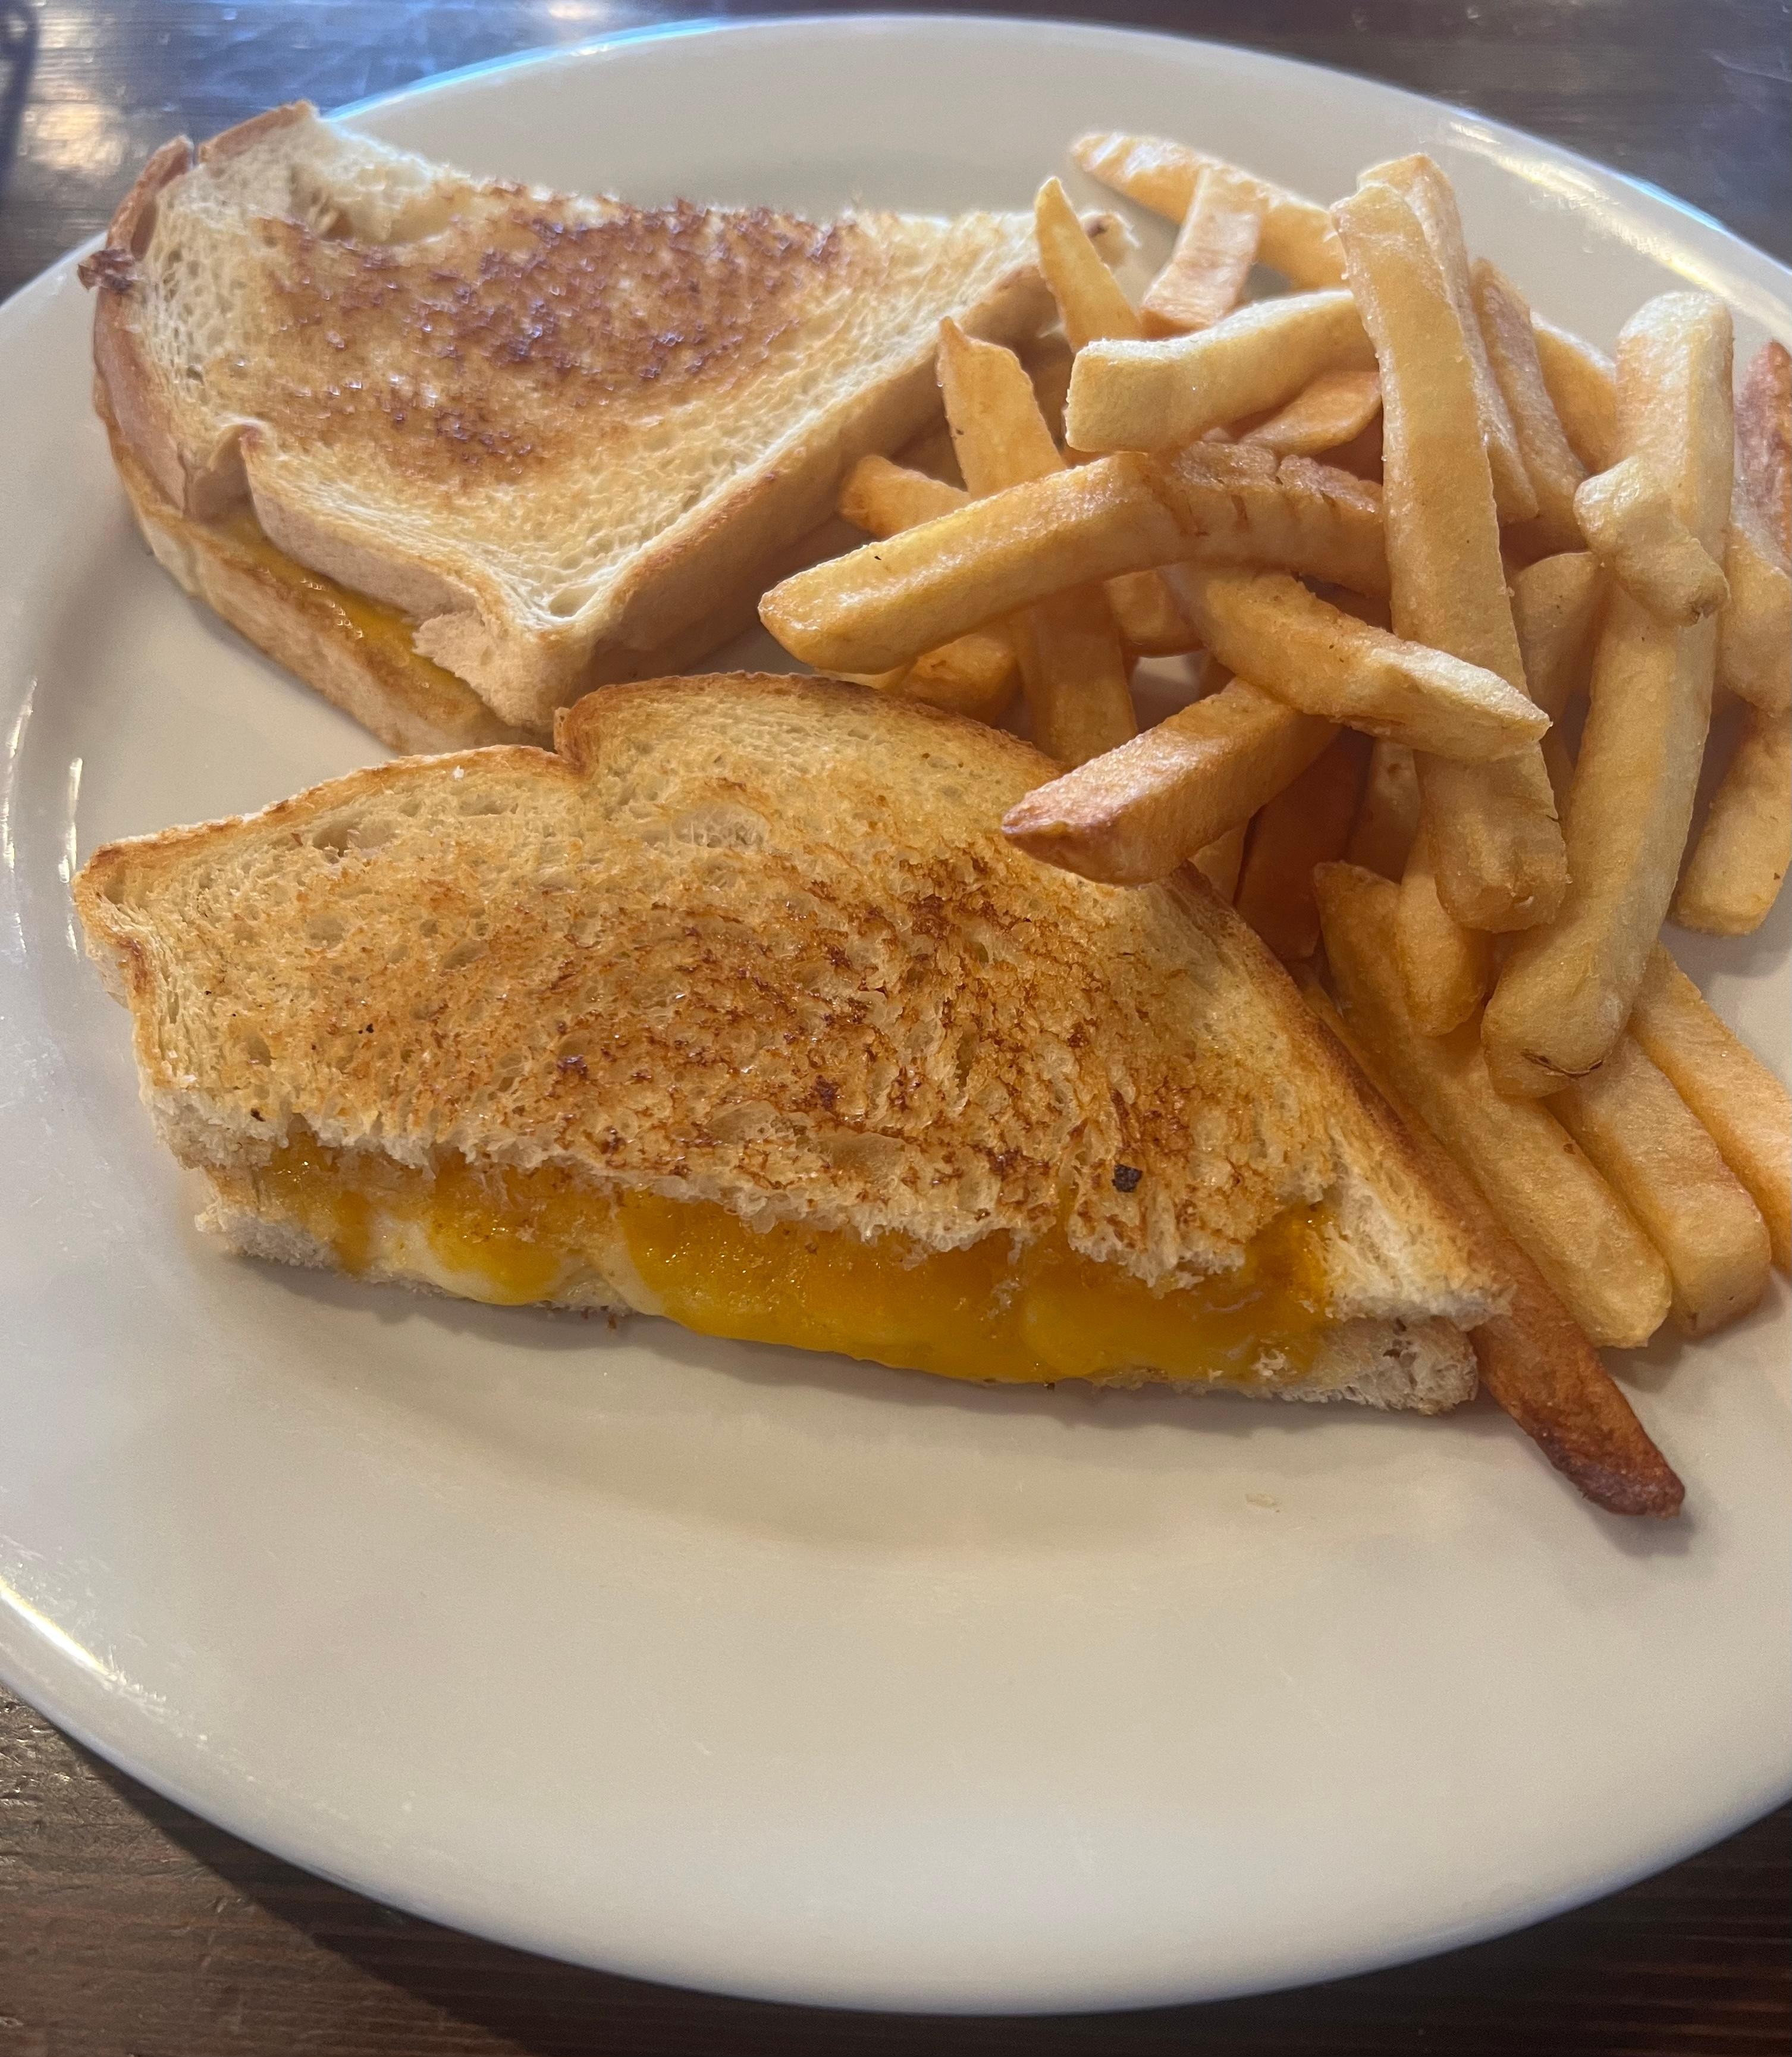 El Jefe's Grilled Cheese Sandwich